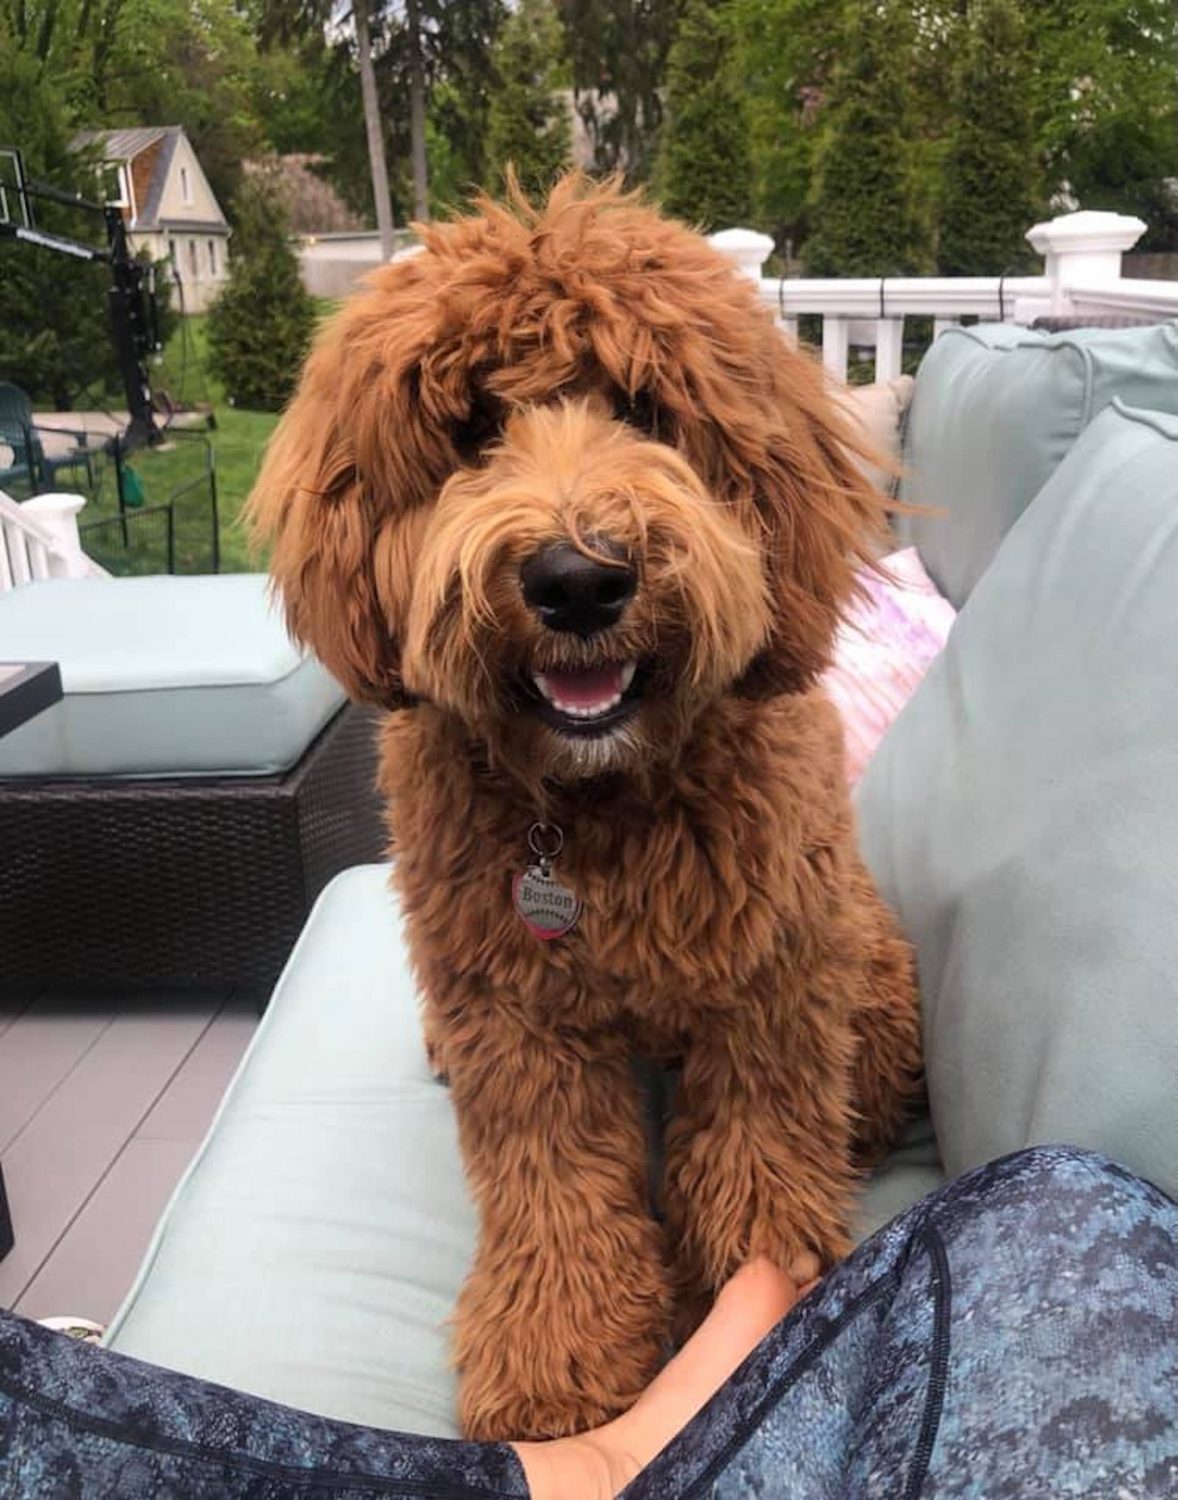 The F1BB golden doodle is a great choice for families with allergies. This breed is hypoallergenic, which means it doesn't produce as much of the dander that can trigger allergic reactions.